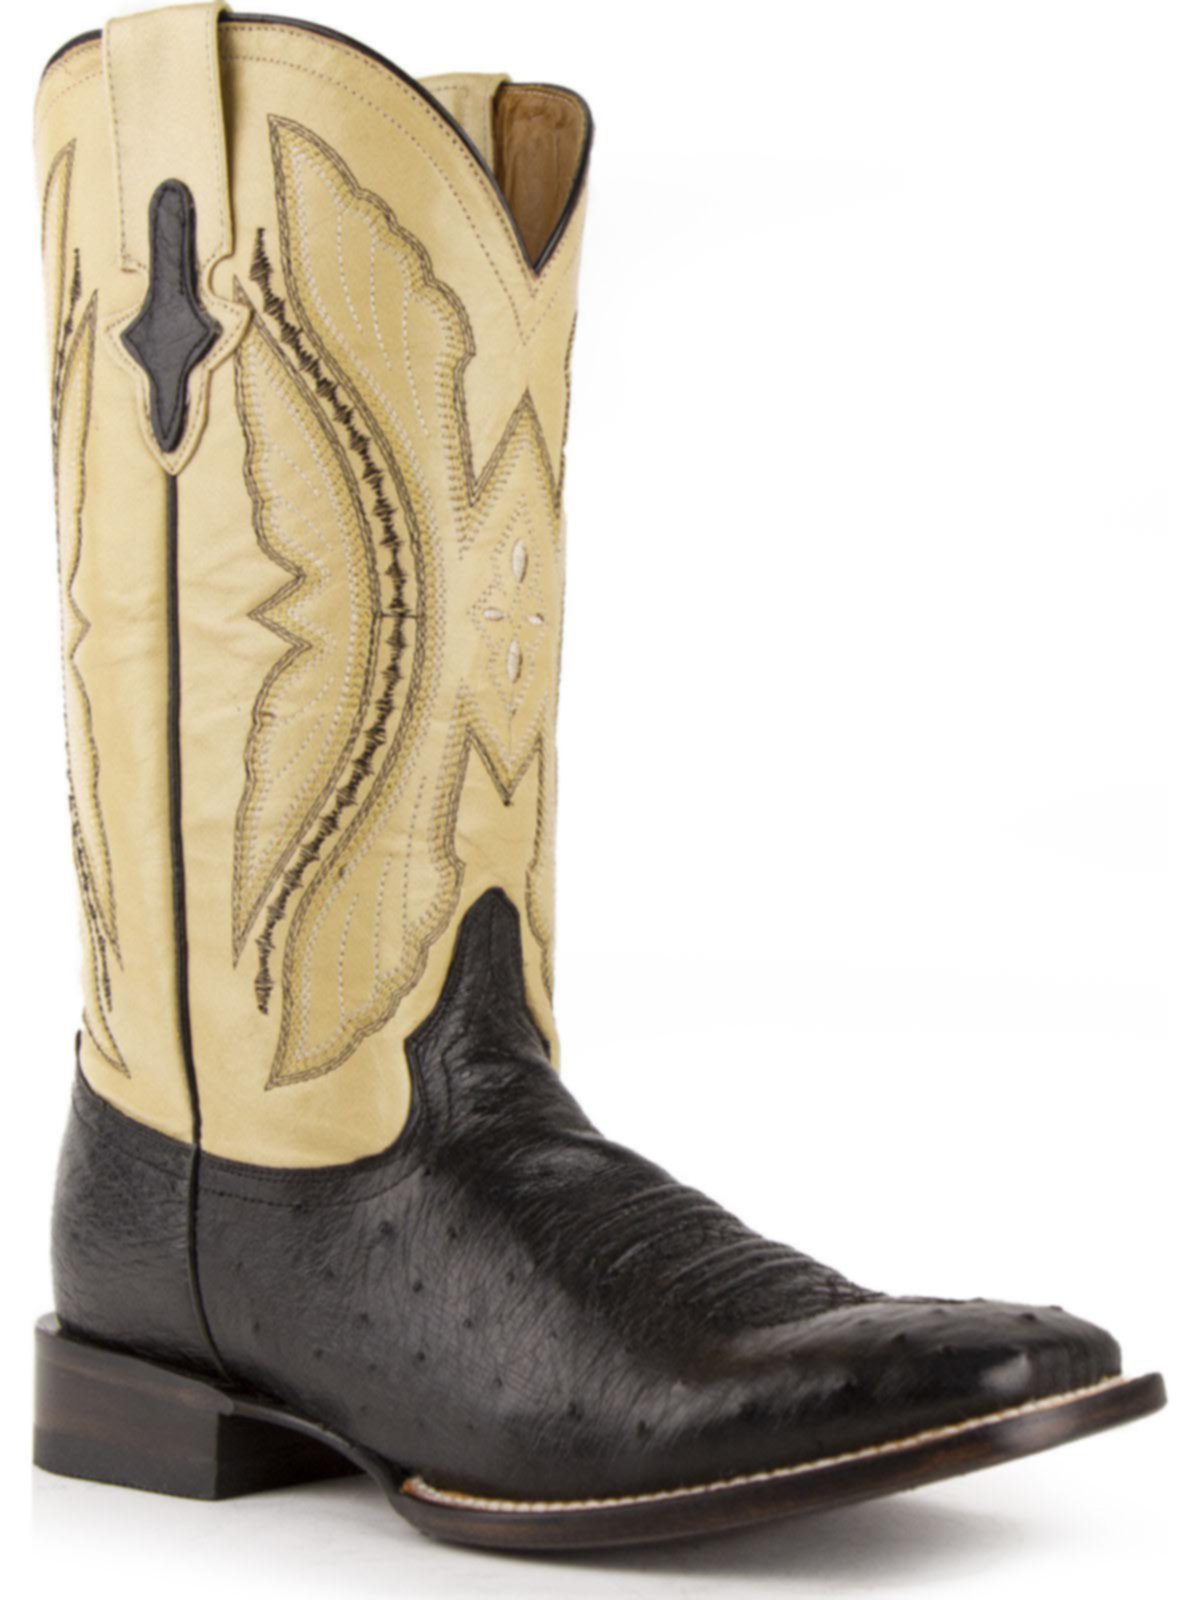 yellow ostrich boots